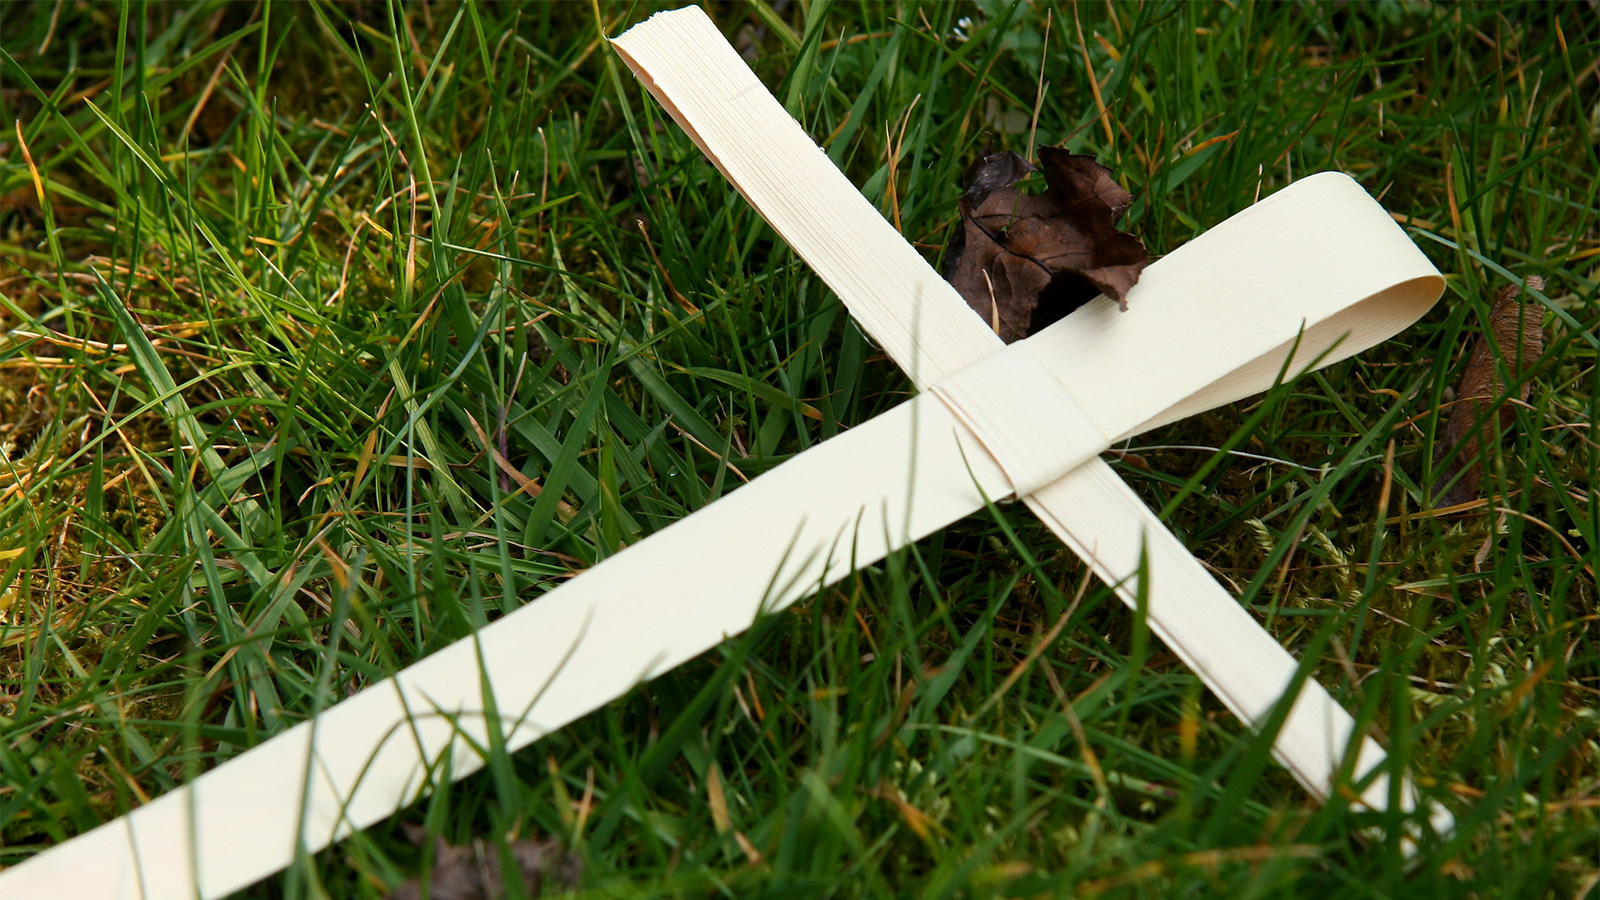 A palm leaf woven into a cross, lying on some grass.